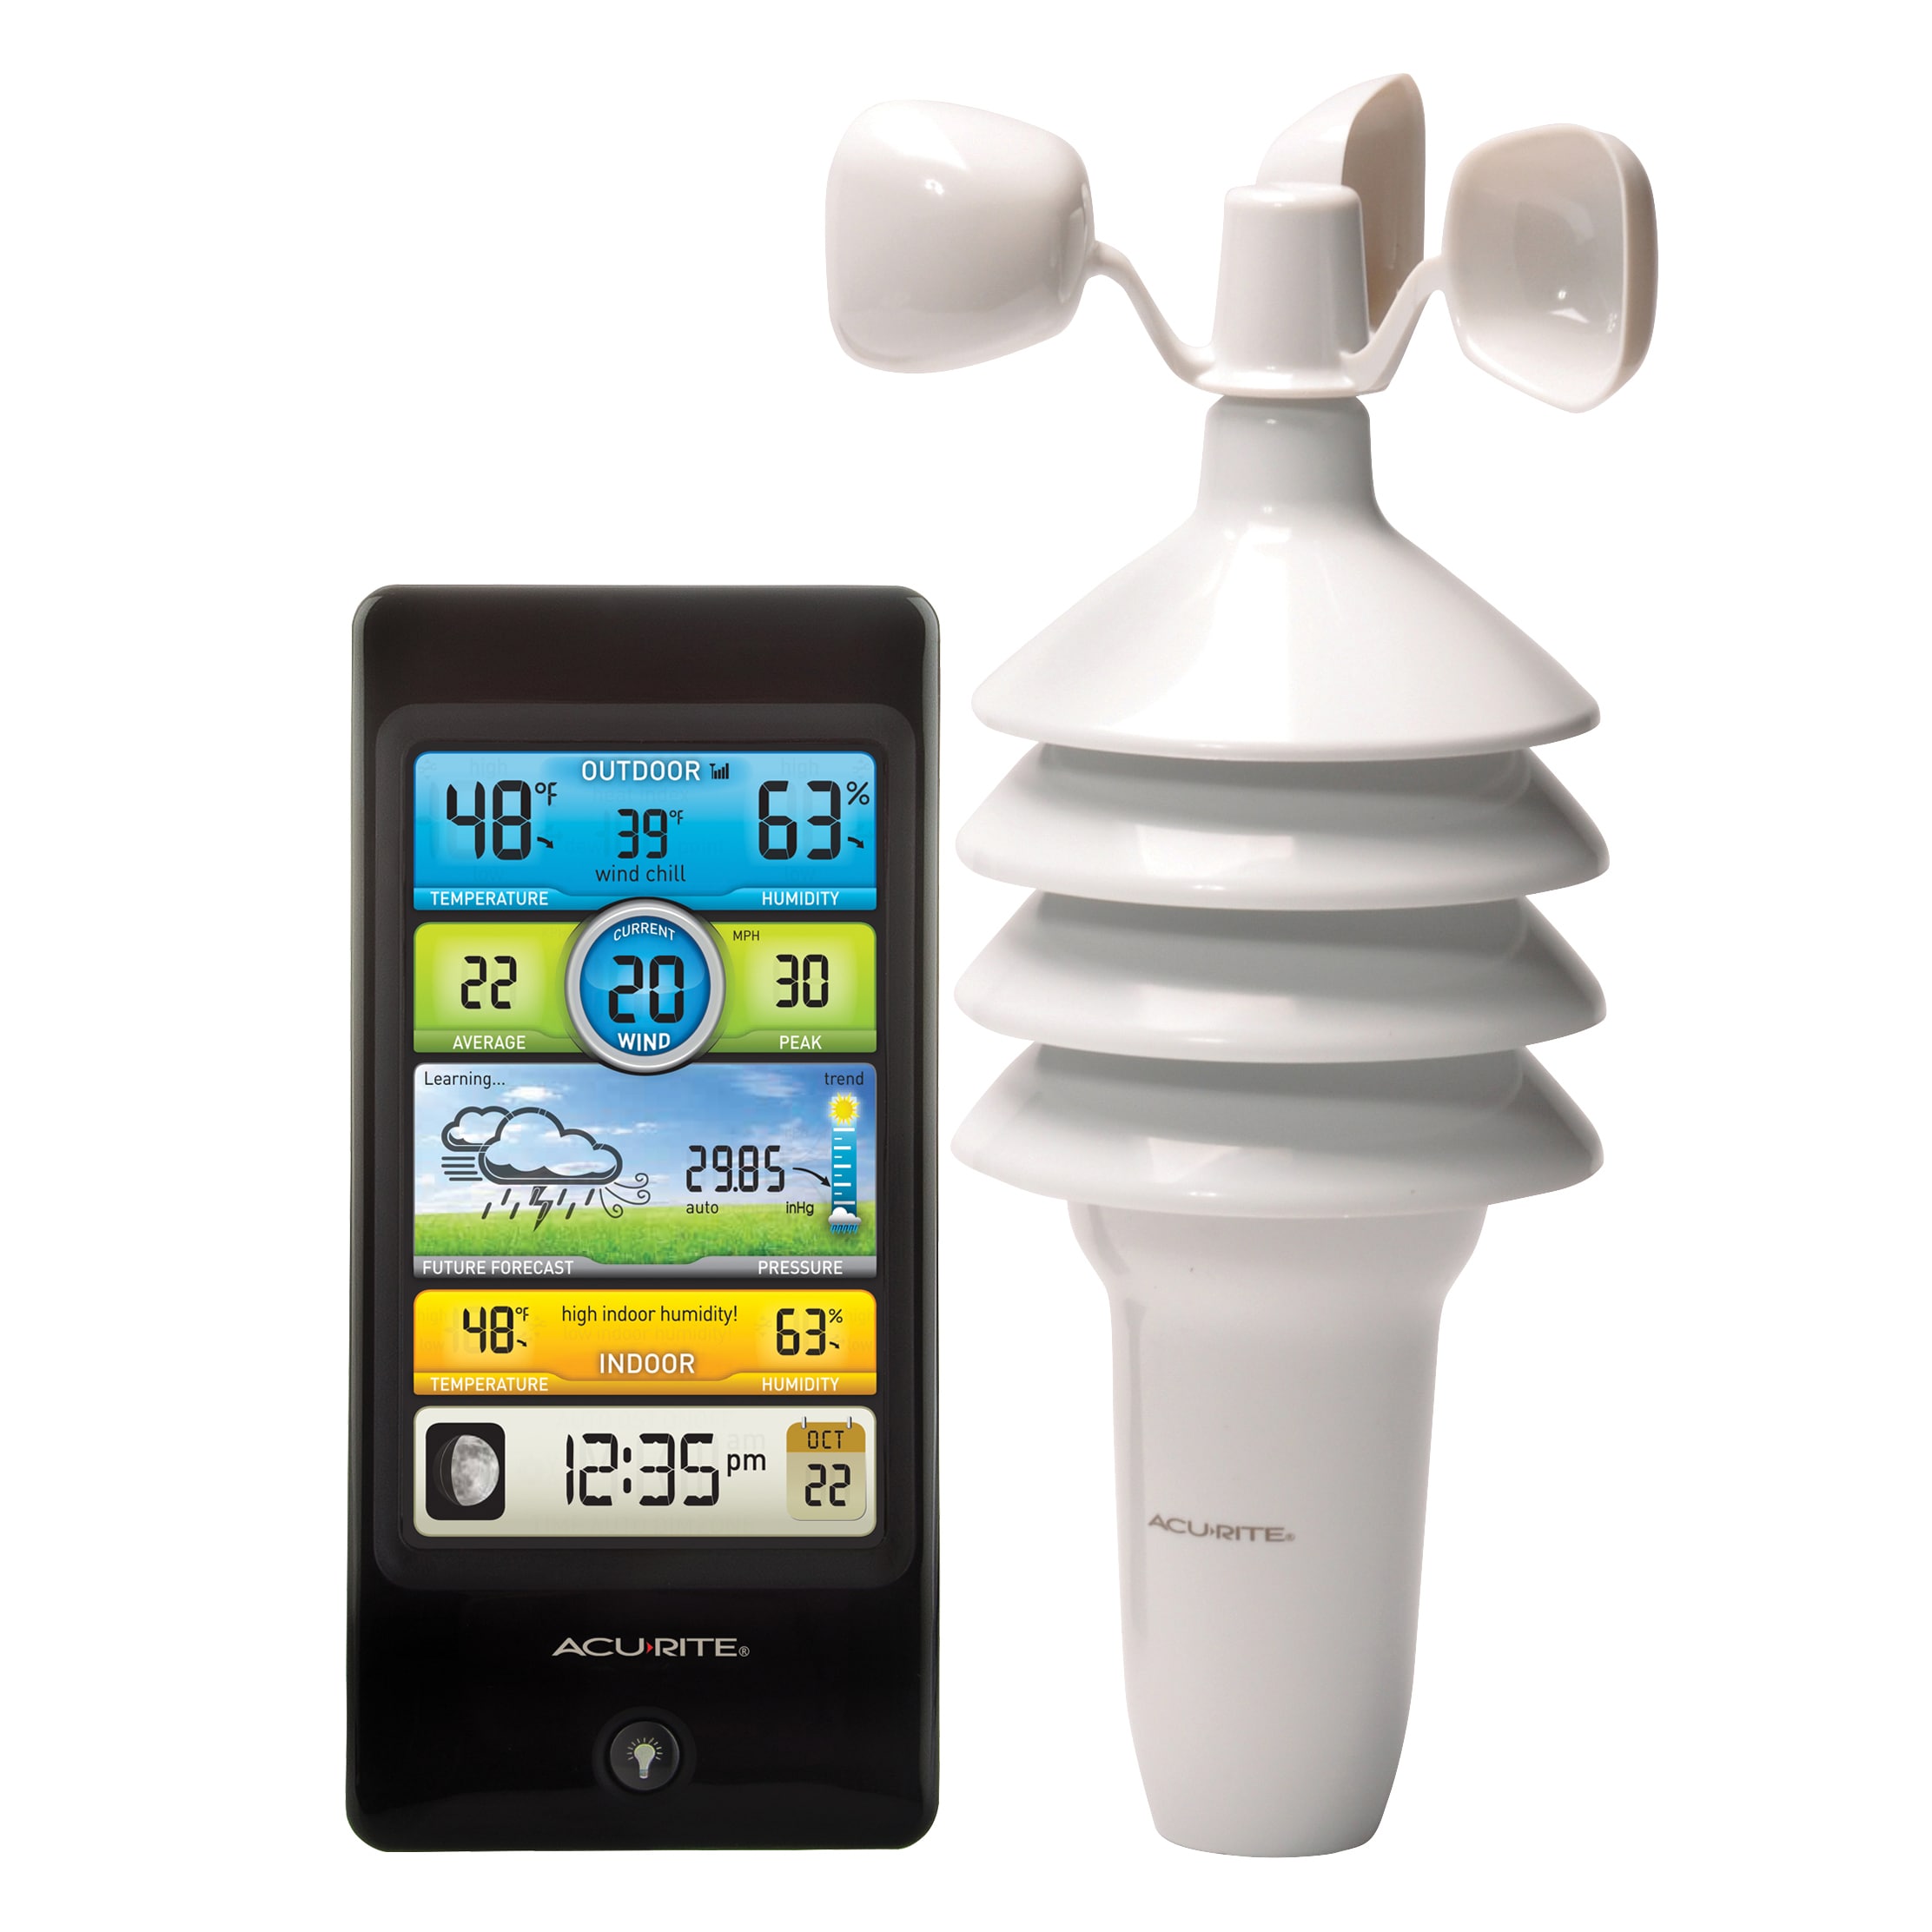 Wireless Thermometer w/ Remote Sensor by AcuRite at Fleet Farm